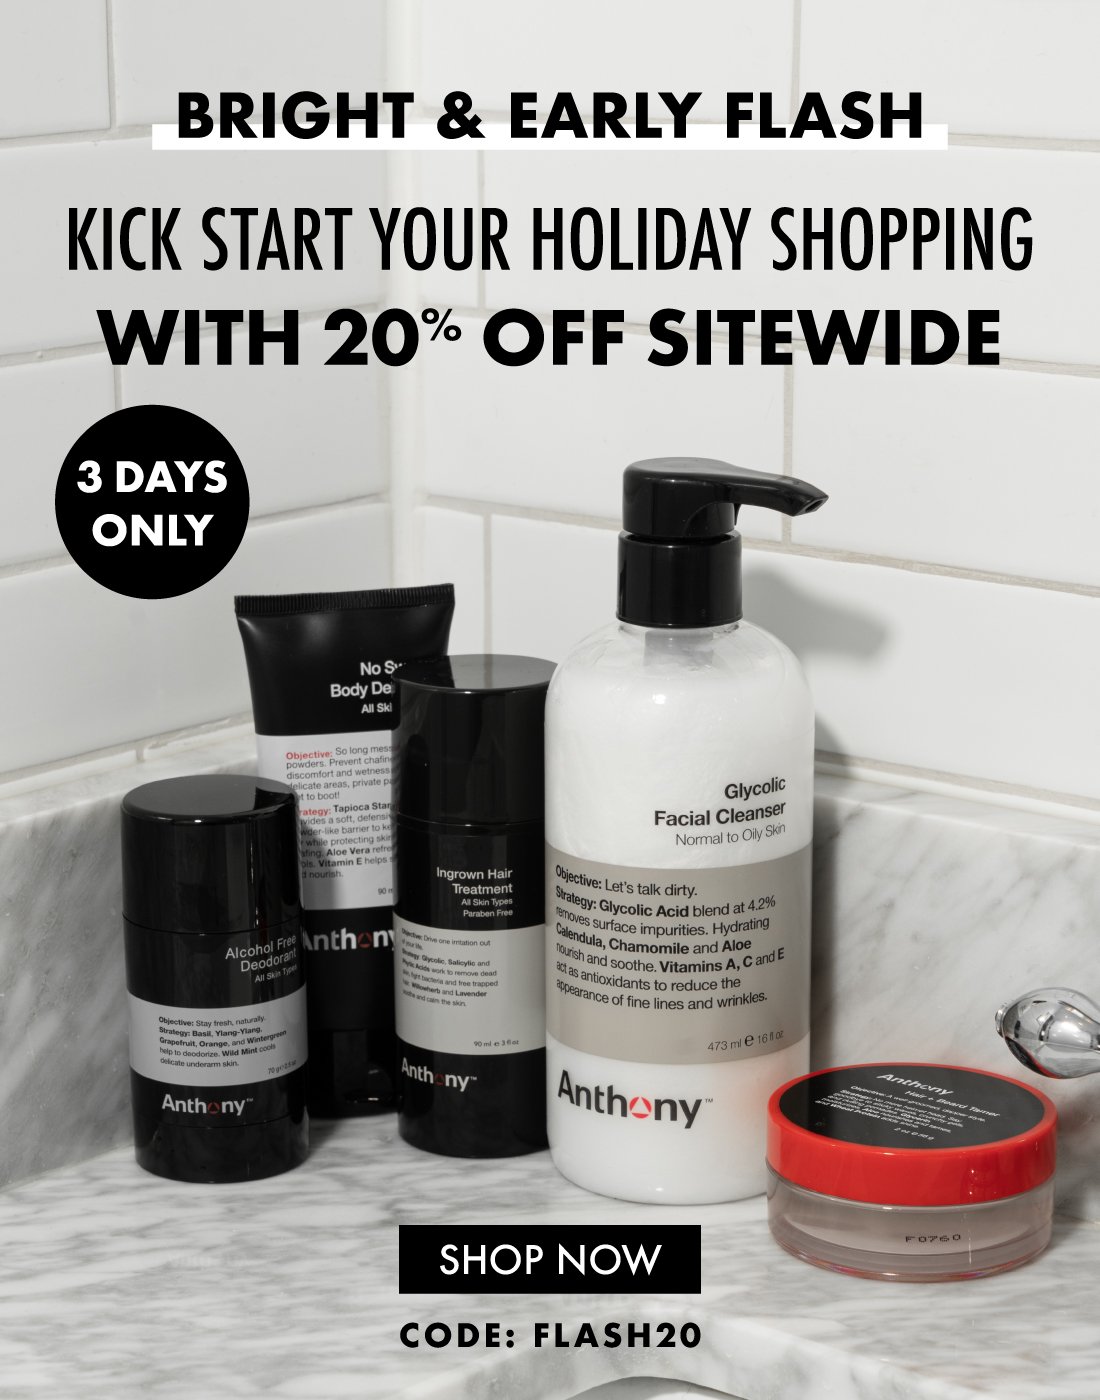 Kick start your holiday shopping, 20% off sitewide. code: flash20